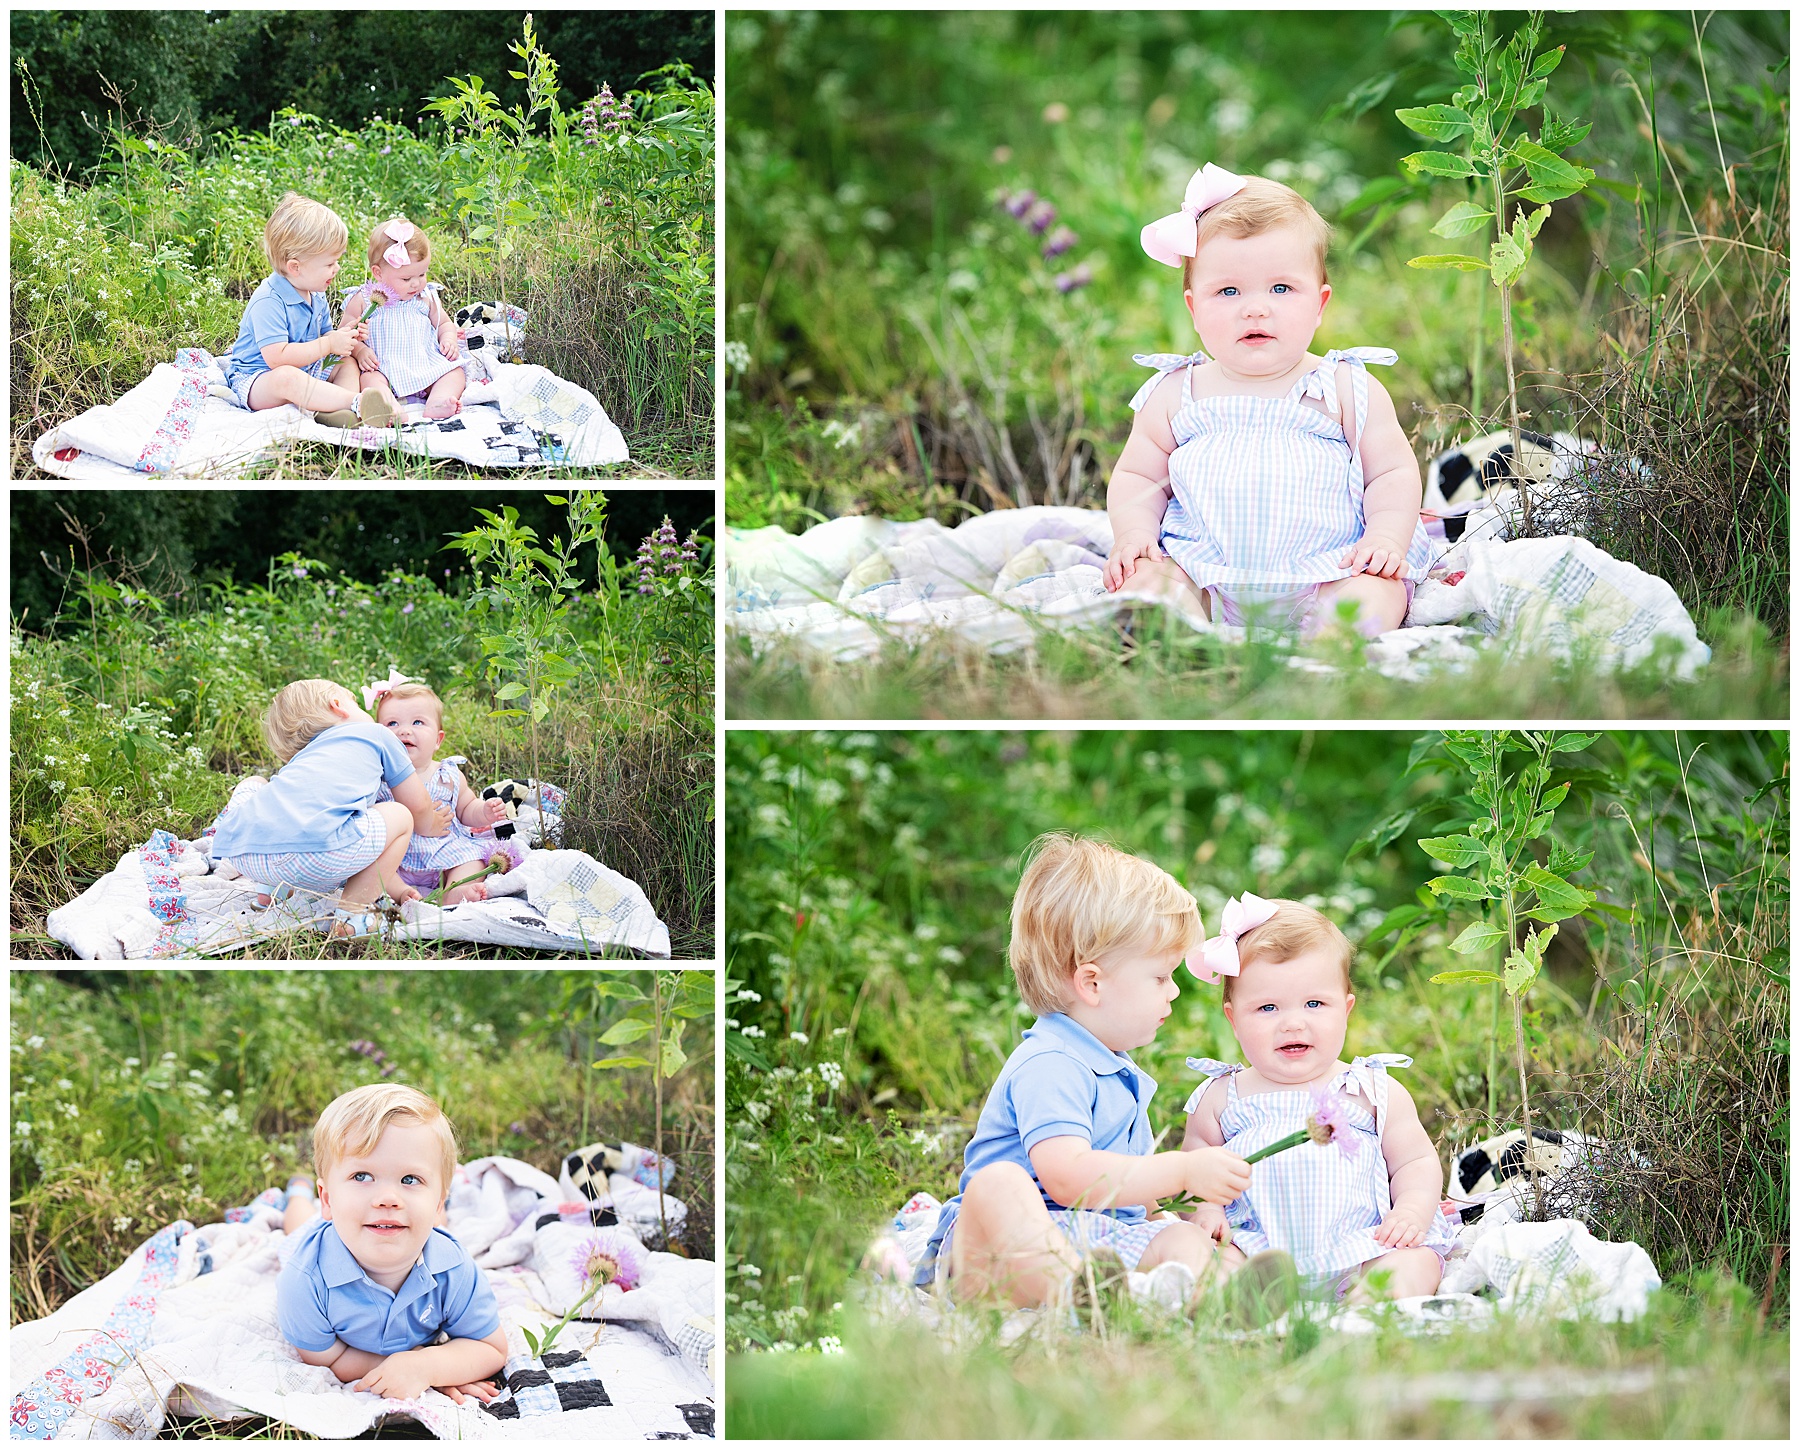 brother and sister sitting together in the wildflowers